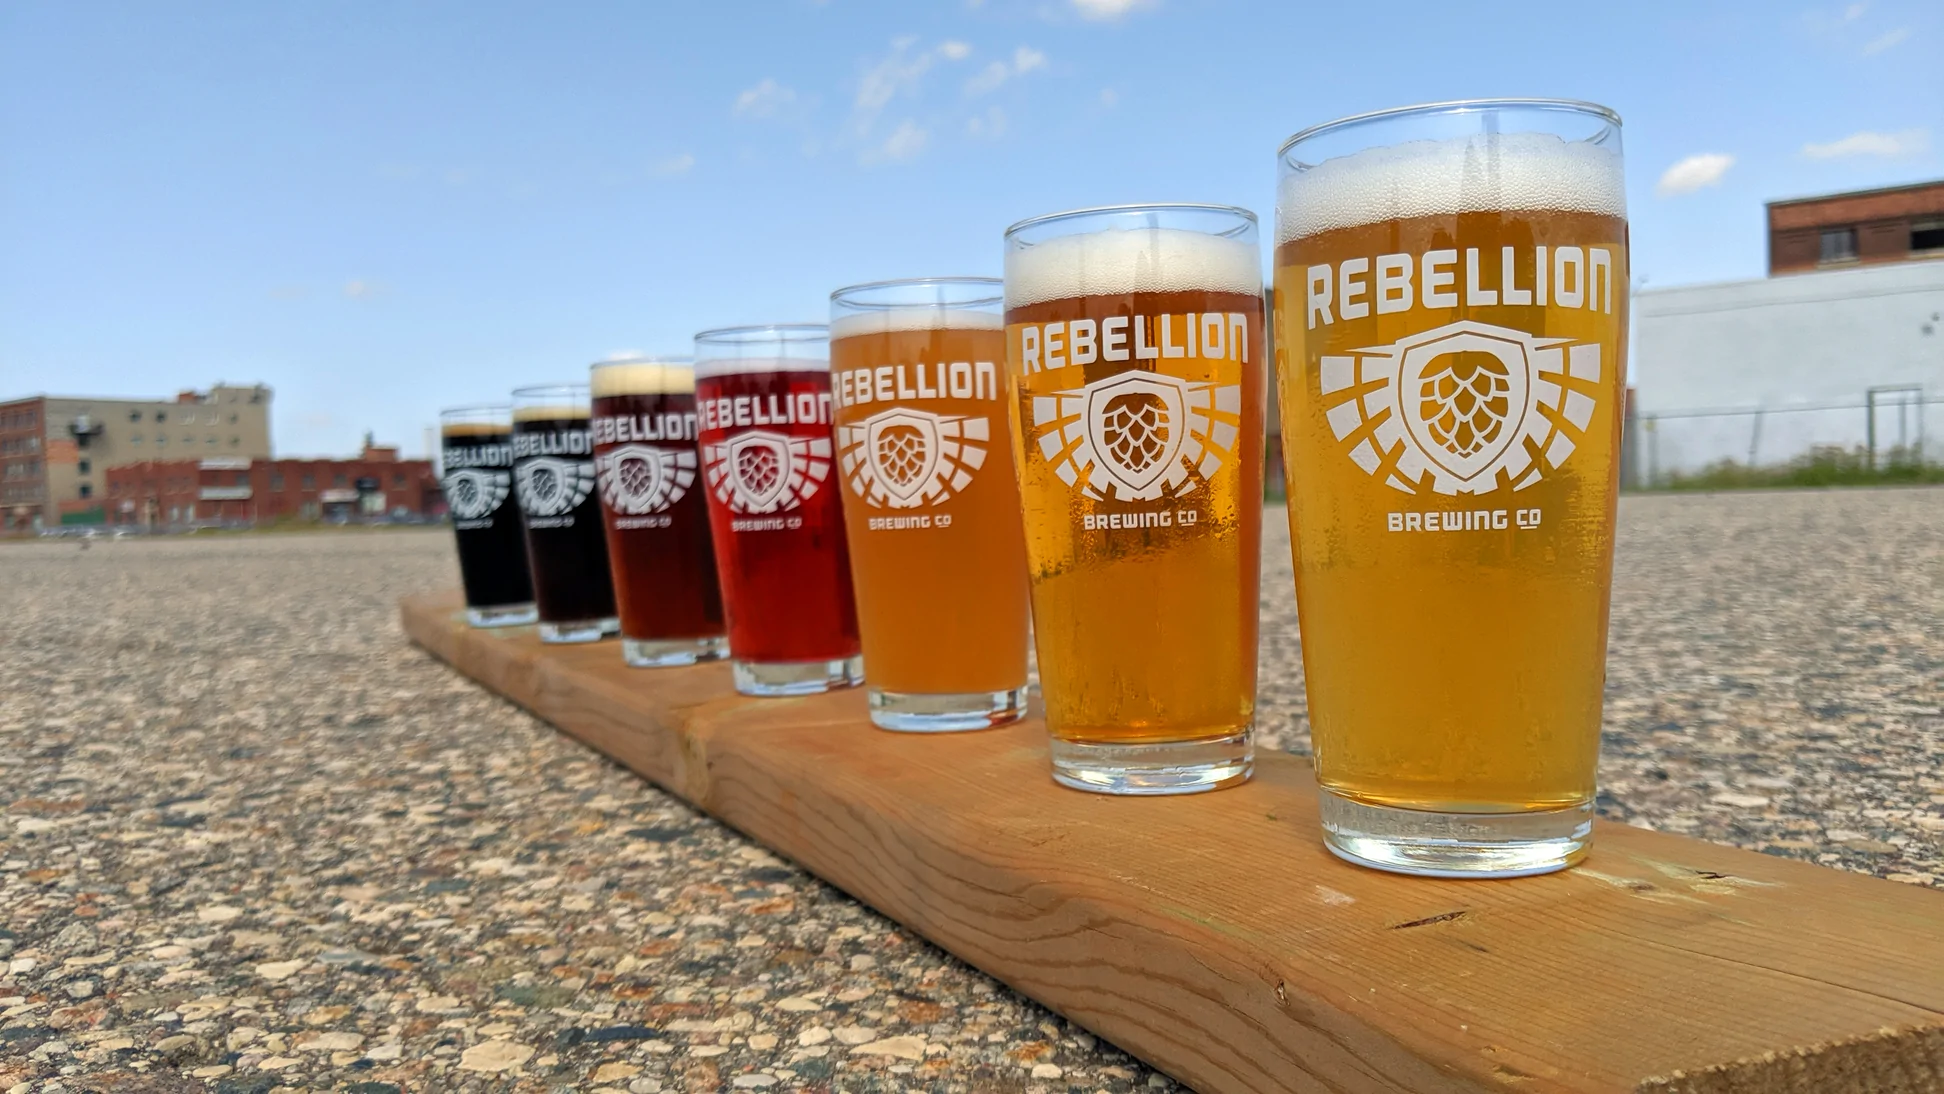 Rebellion Brewing Co. Beers Lined up in a Row